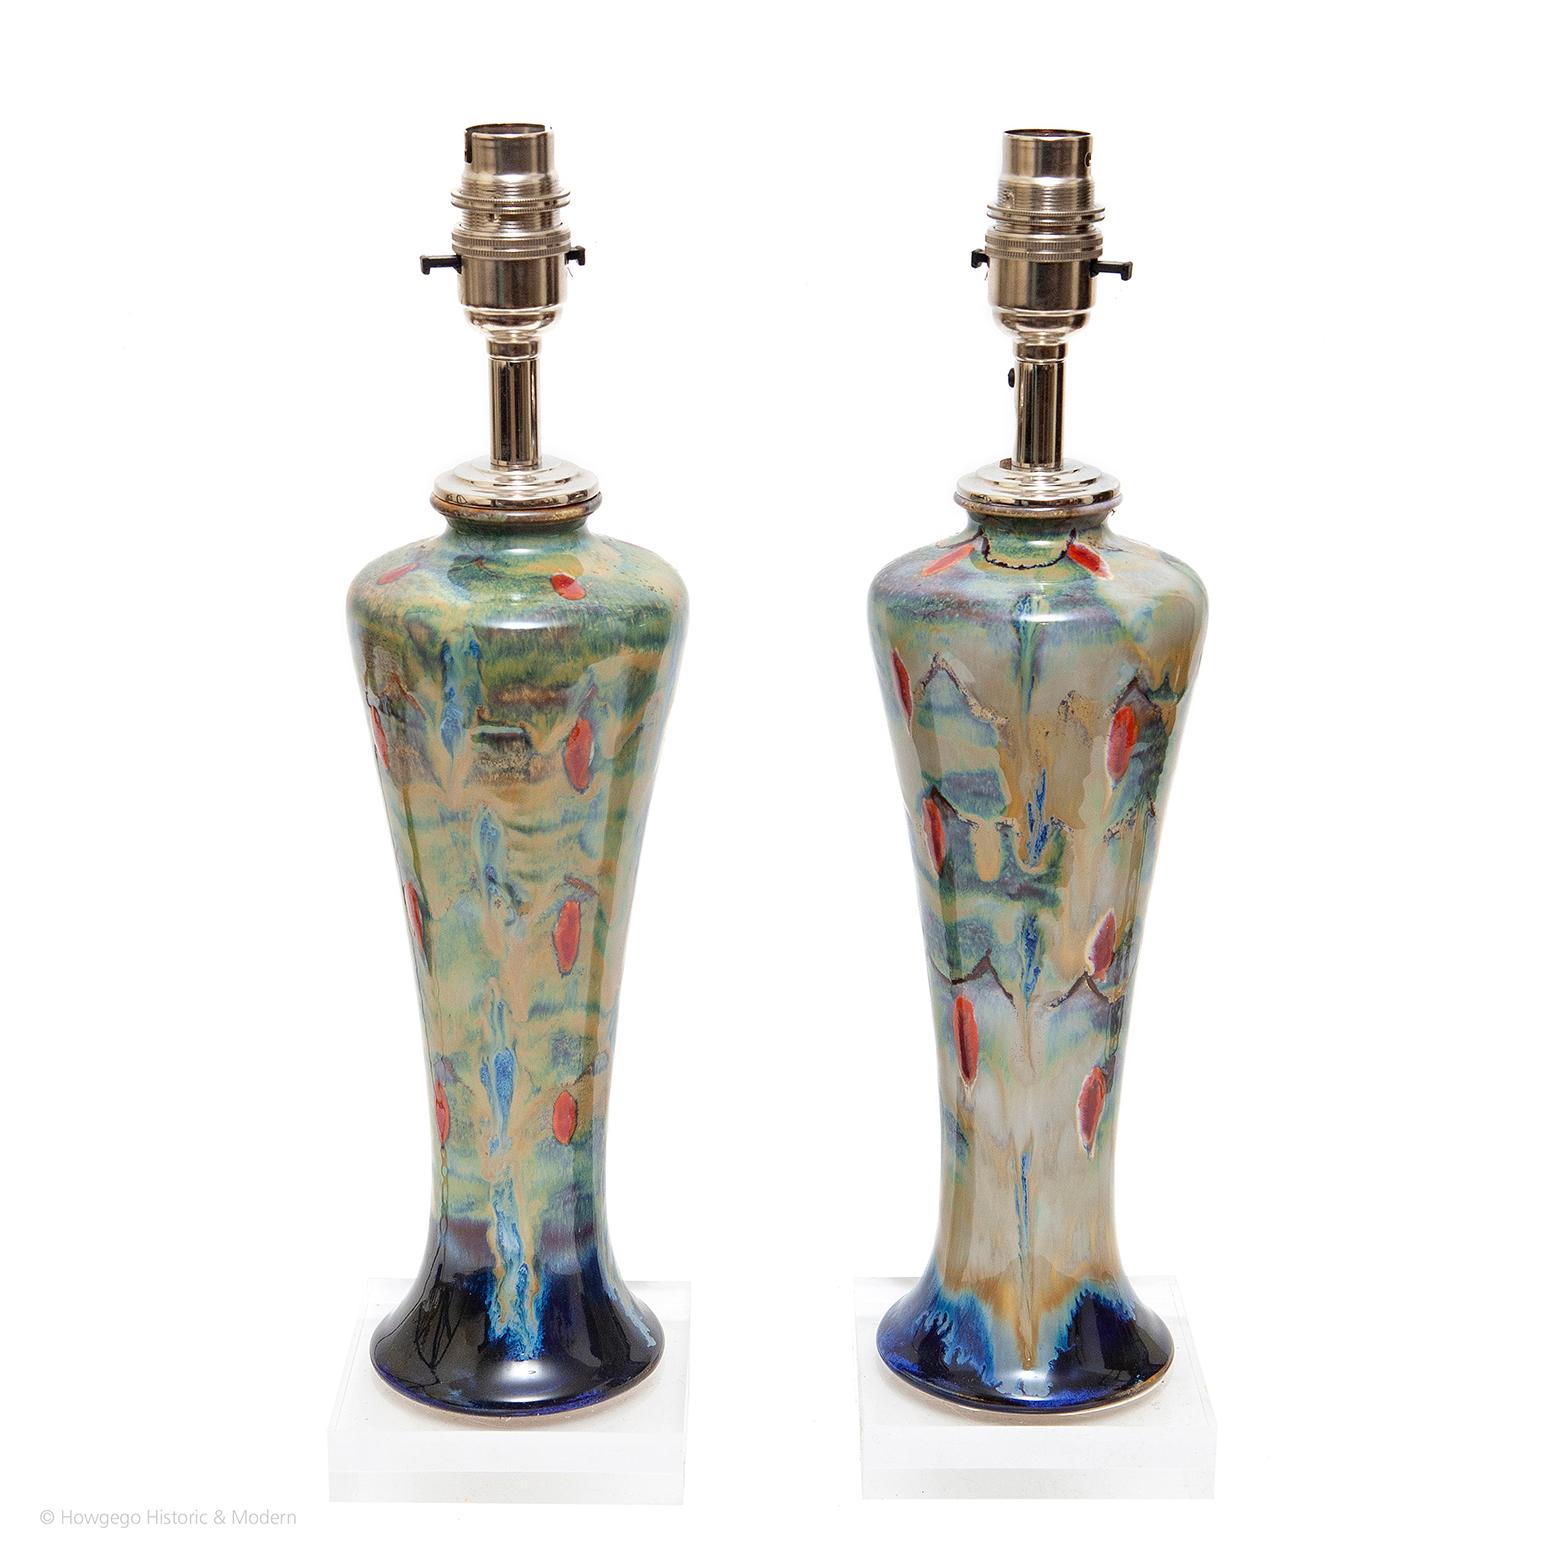 COBRIDGE, PAIR OF SAMBA PATTERN, HANDPAINTED VASES UPCYCLED INTO TABLE LAMPS ON PERSPEX BASES, 15½“ HIGH
One of Cobridge Pottery’s most popular patterns, designed by artist Anita Harris, leading designer at Cobridge, Moorcroft & her own studio